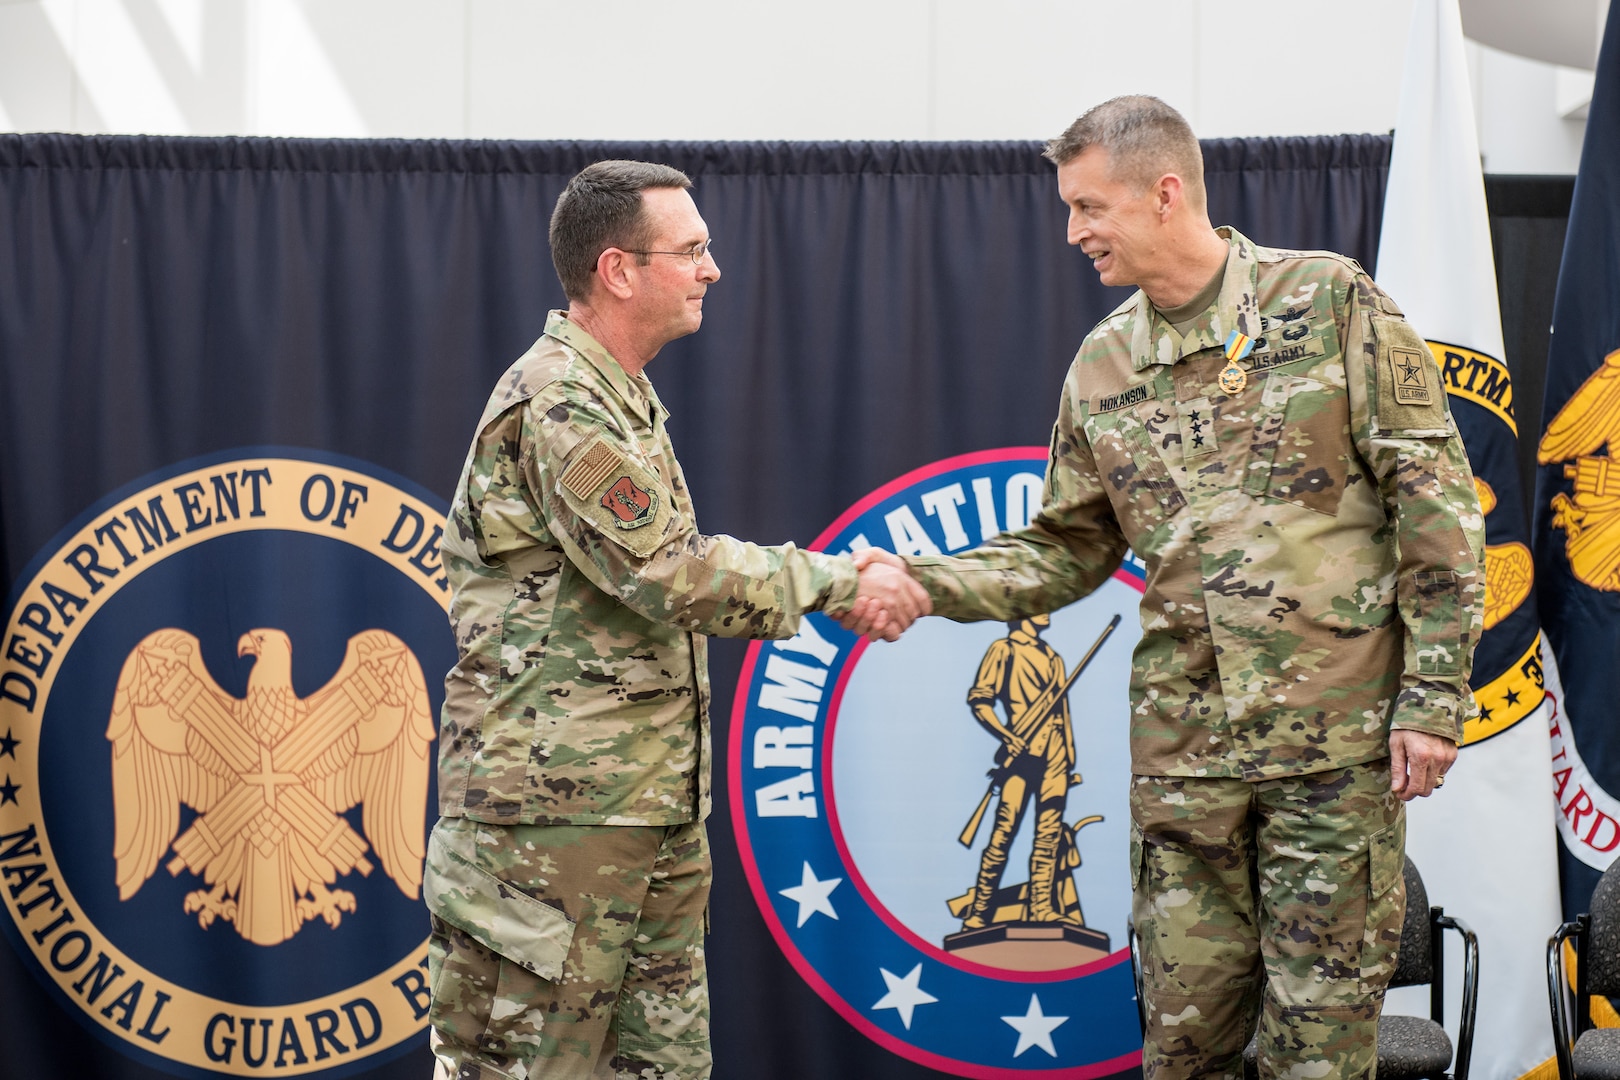 Air Force Gen. Joseph L. Lengyel, chief of the National Guard Bureau, congratulates Army Lt. Gen. Daniel Hokanson, who became of the Army National Guard in a ceremony June 21, 2019, at the Herbert R. Temple Army National Guard Readiness Center, Arlington Hall Station in Arlington, Virginia.